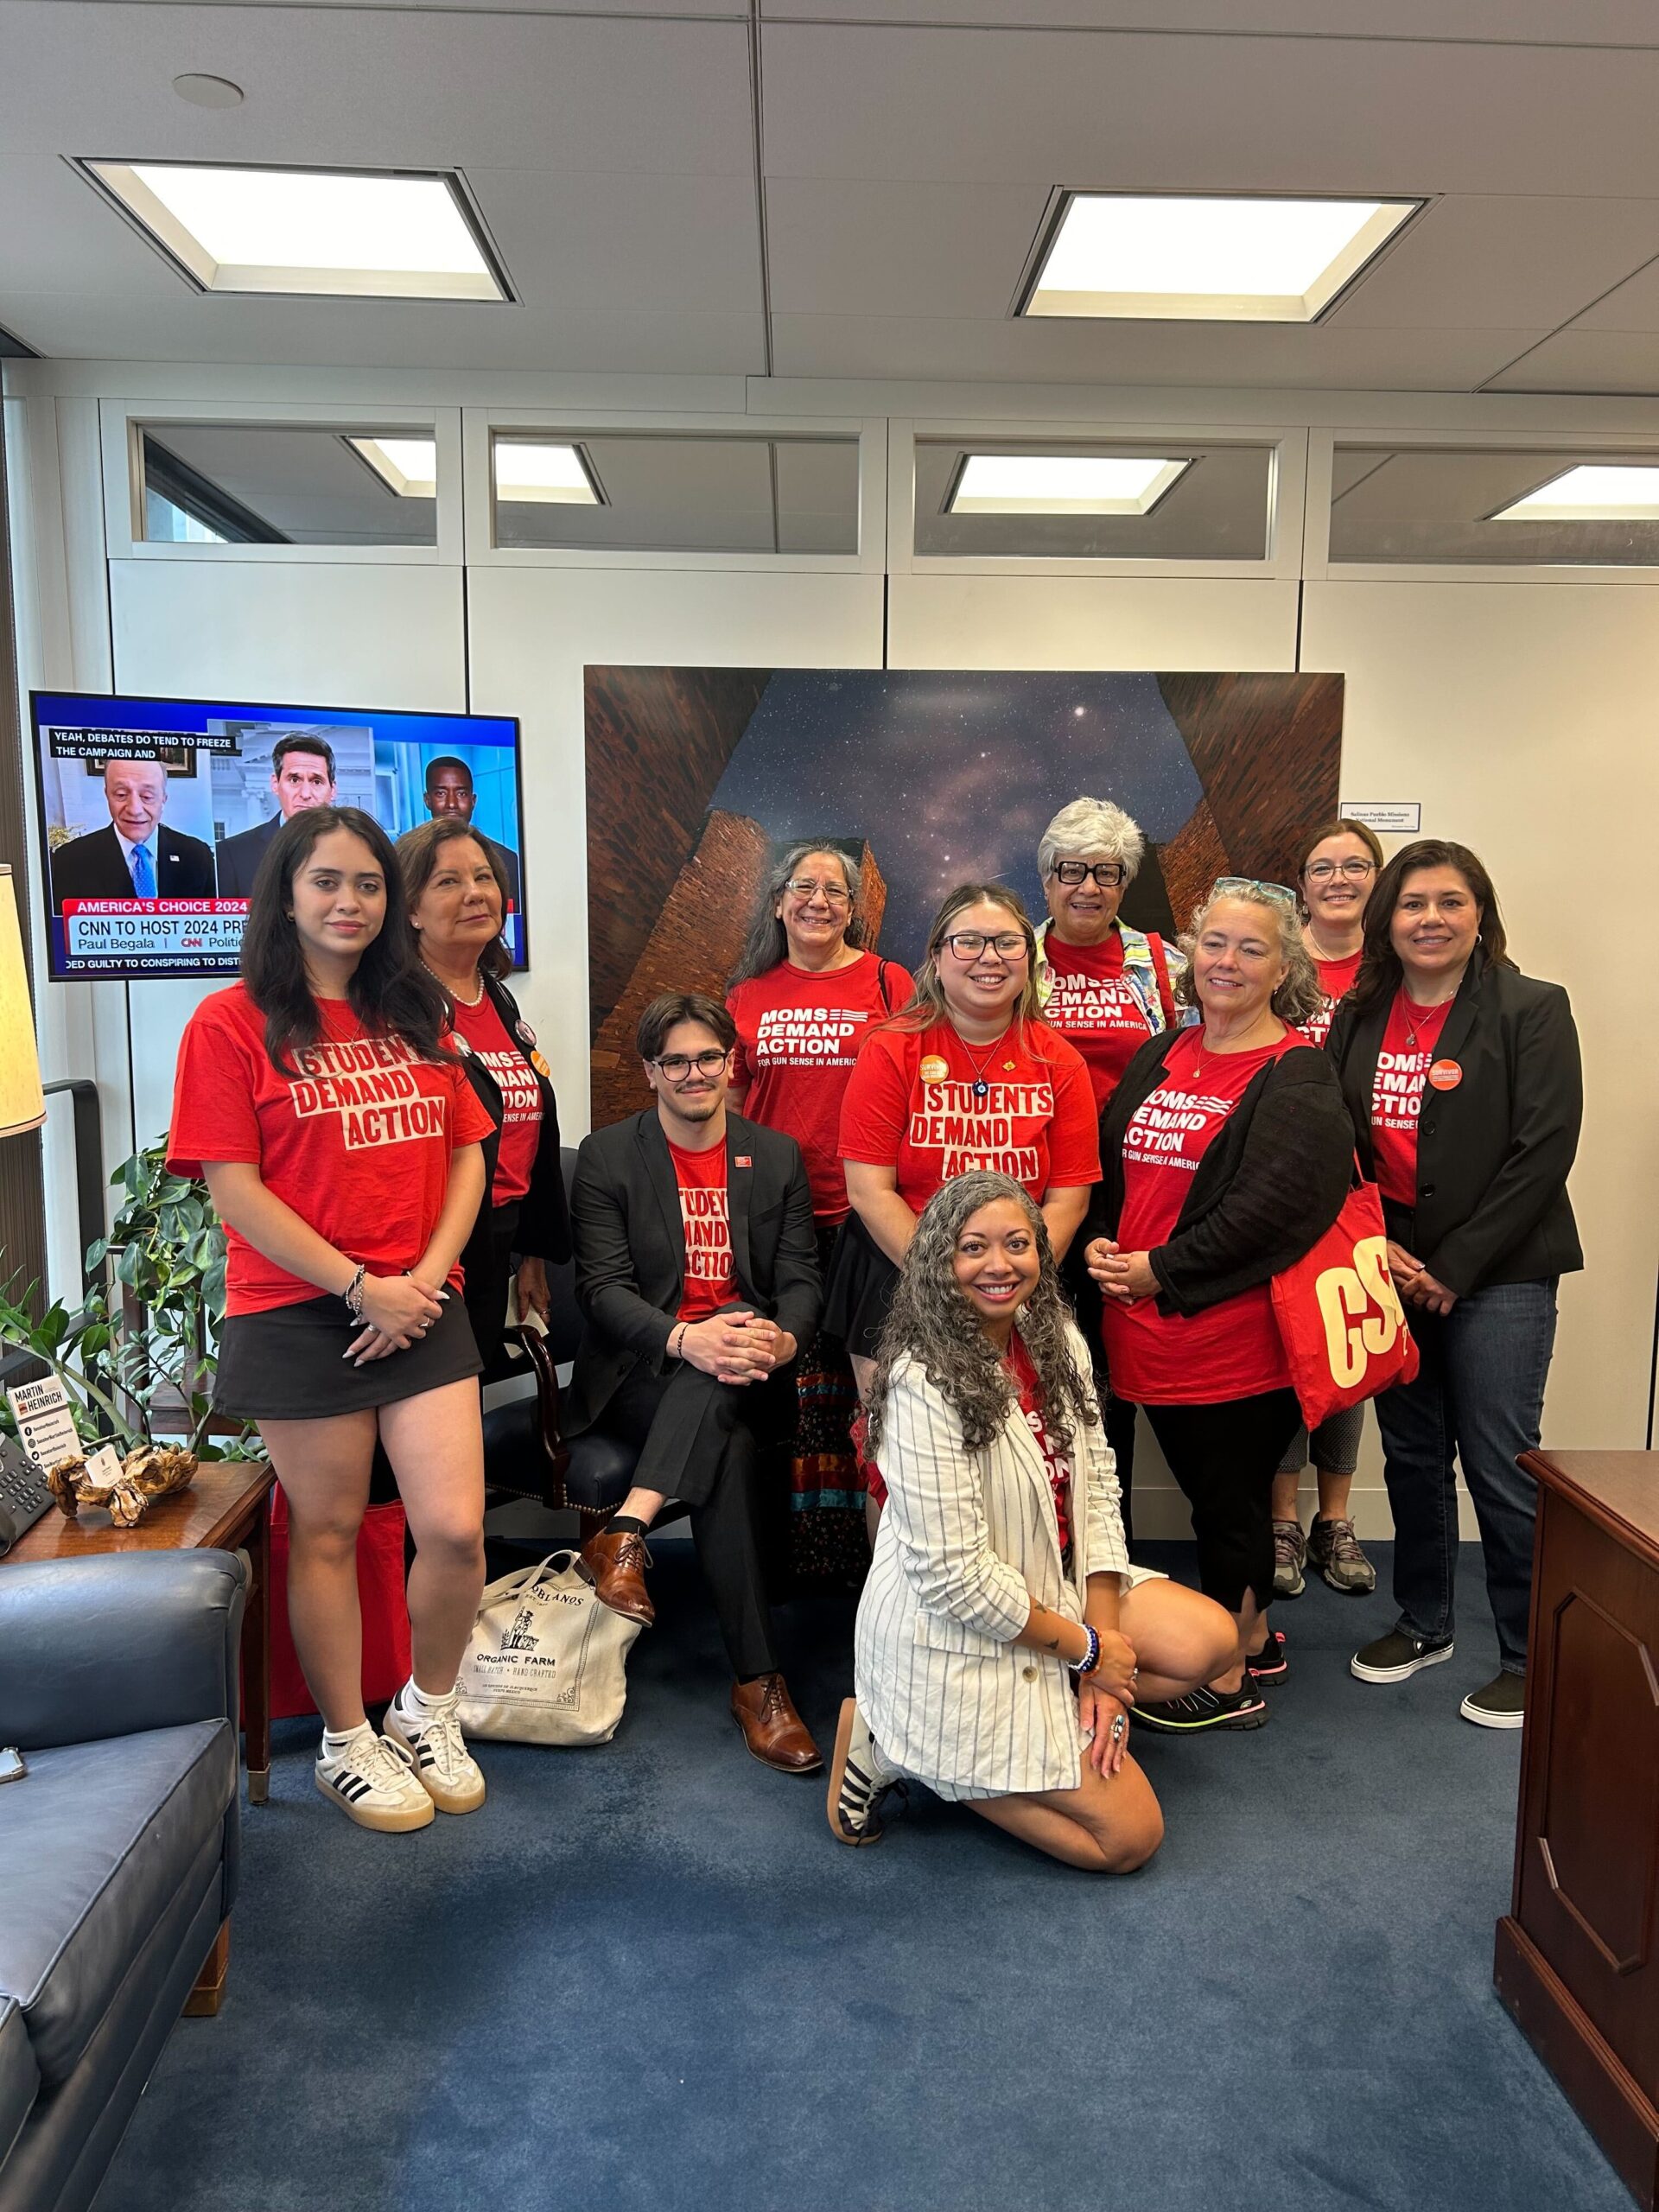 Ten volunteers from New Mexico pose in the waiting area of Sen. Heinrich's office. They all wear red Moms Demand Action and Students Demand Action shirts. 